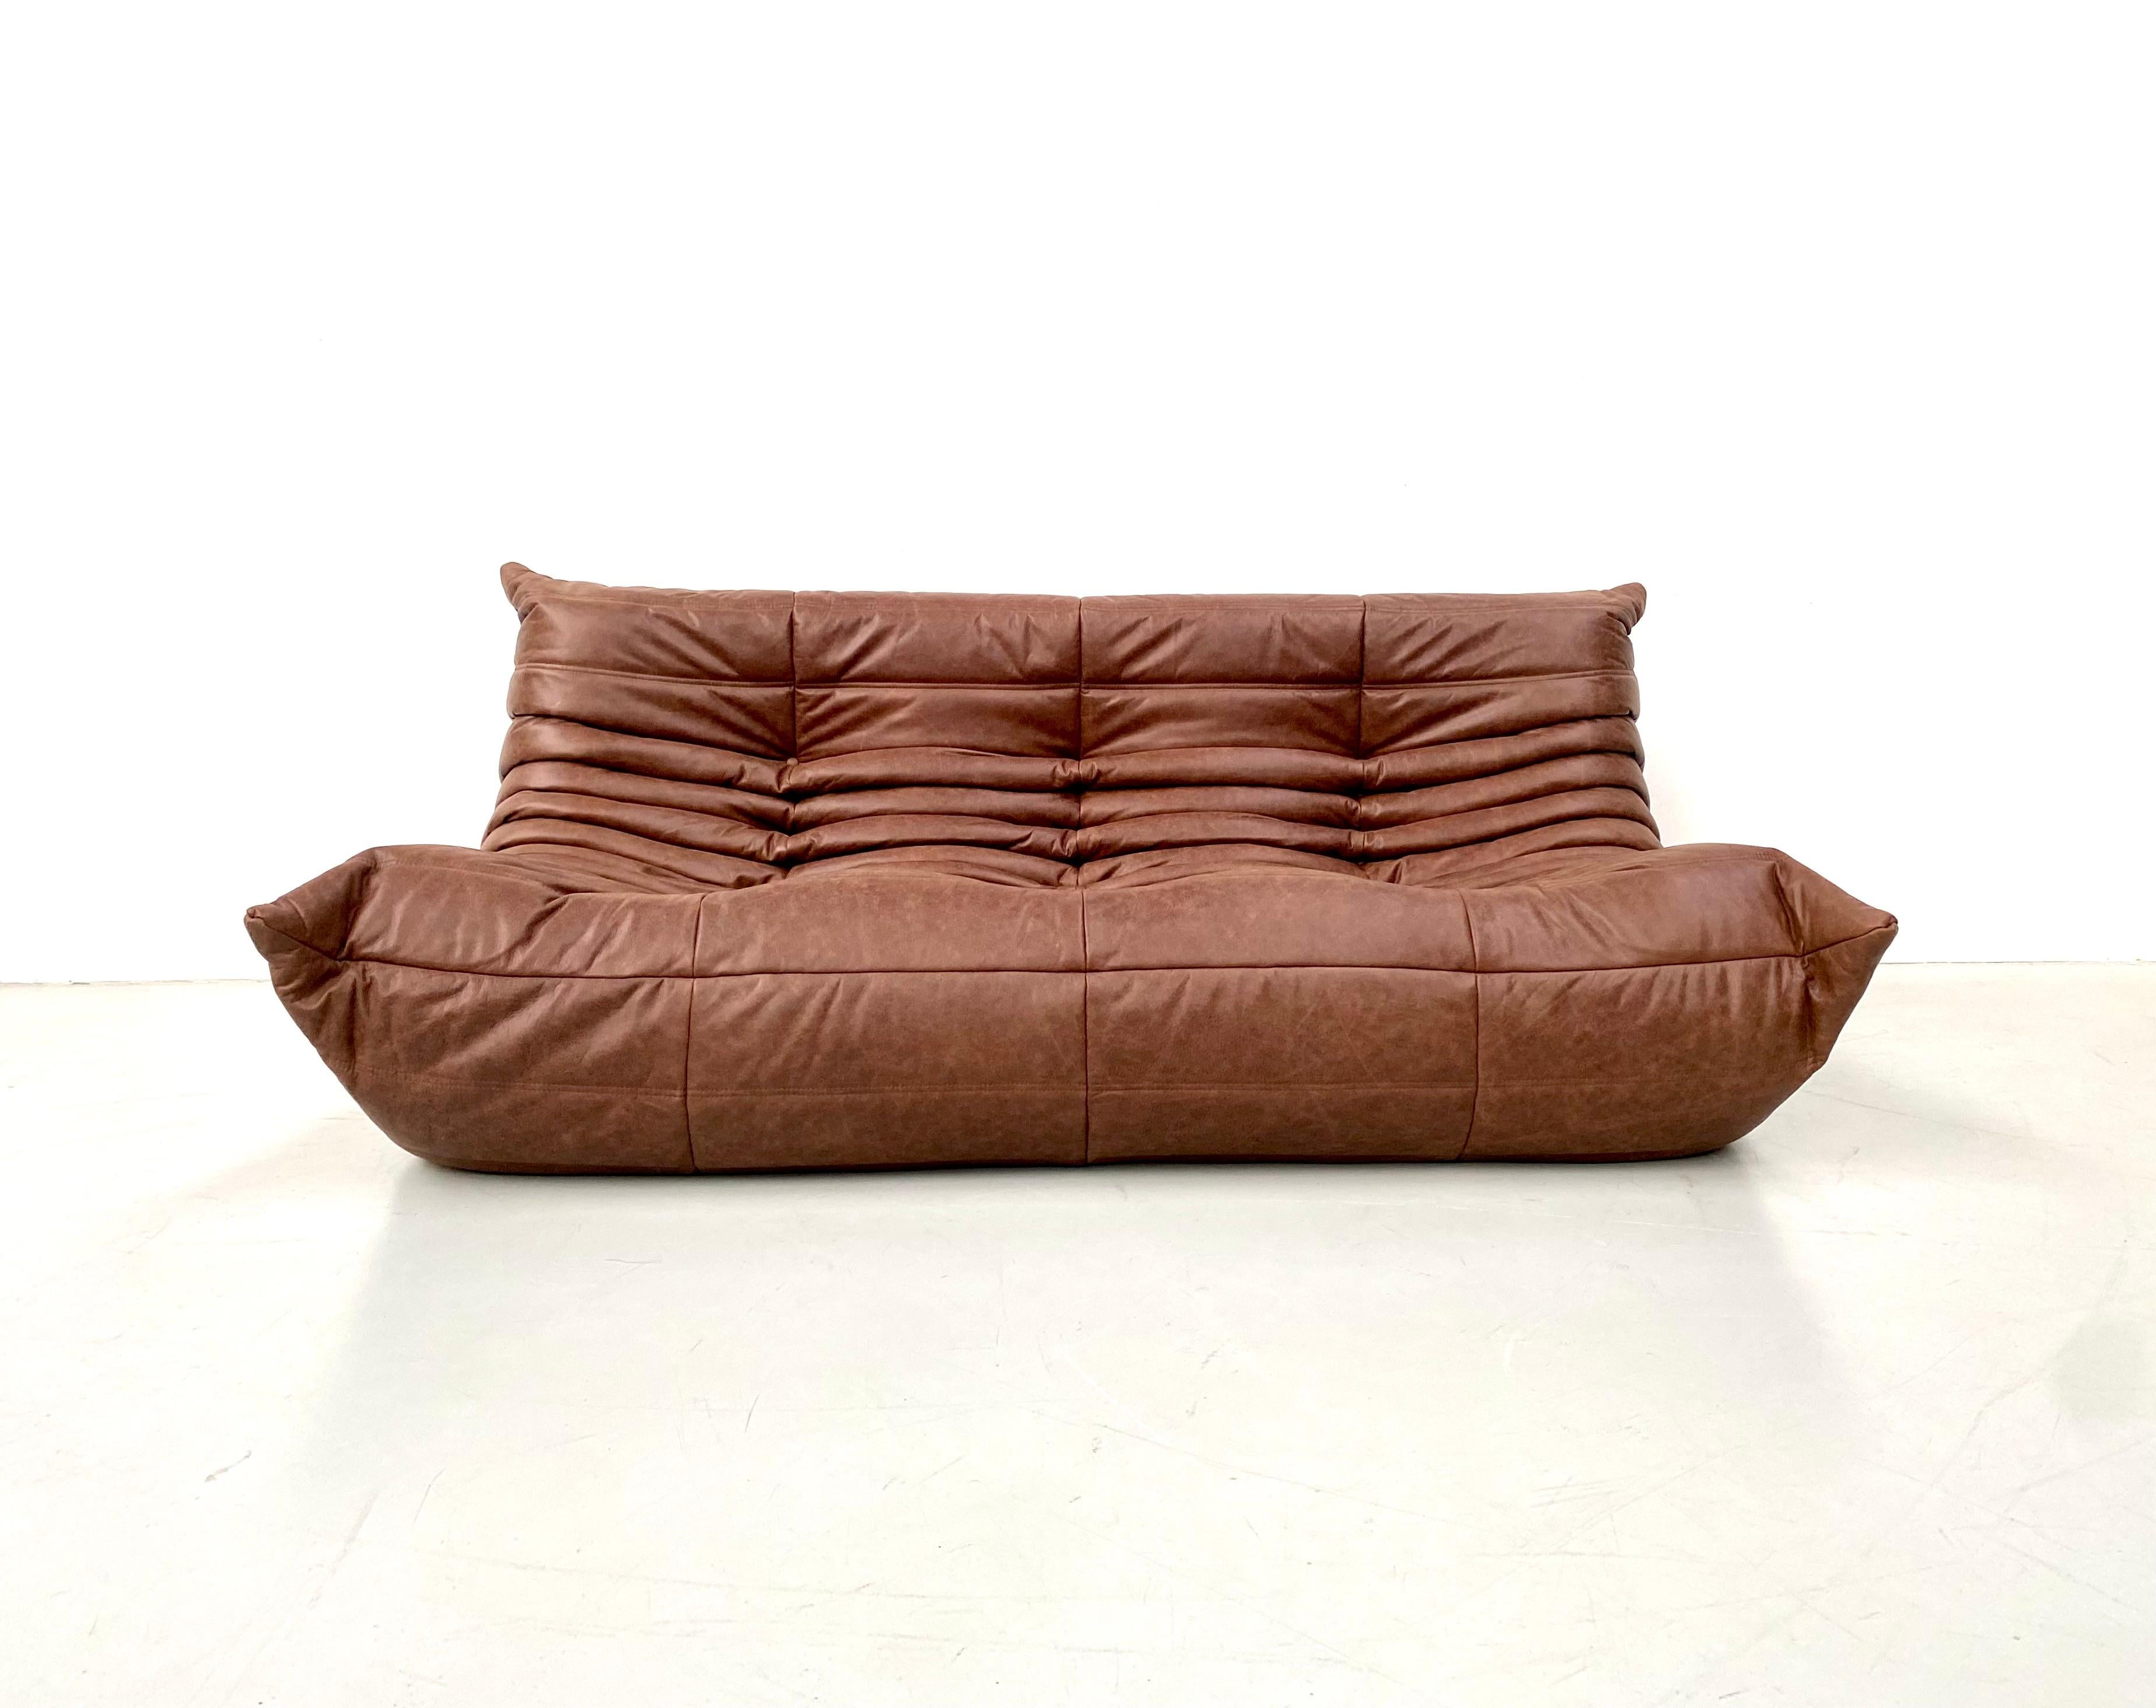 The Togo was designed by Michel Ducaroy in 1973 for Ligne Roset. It is the first sofa/chair ever made only of foam and leather. The padding consists of foam in 5 different densities.